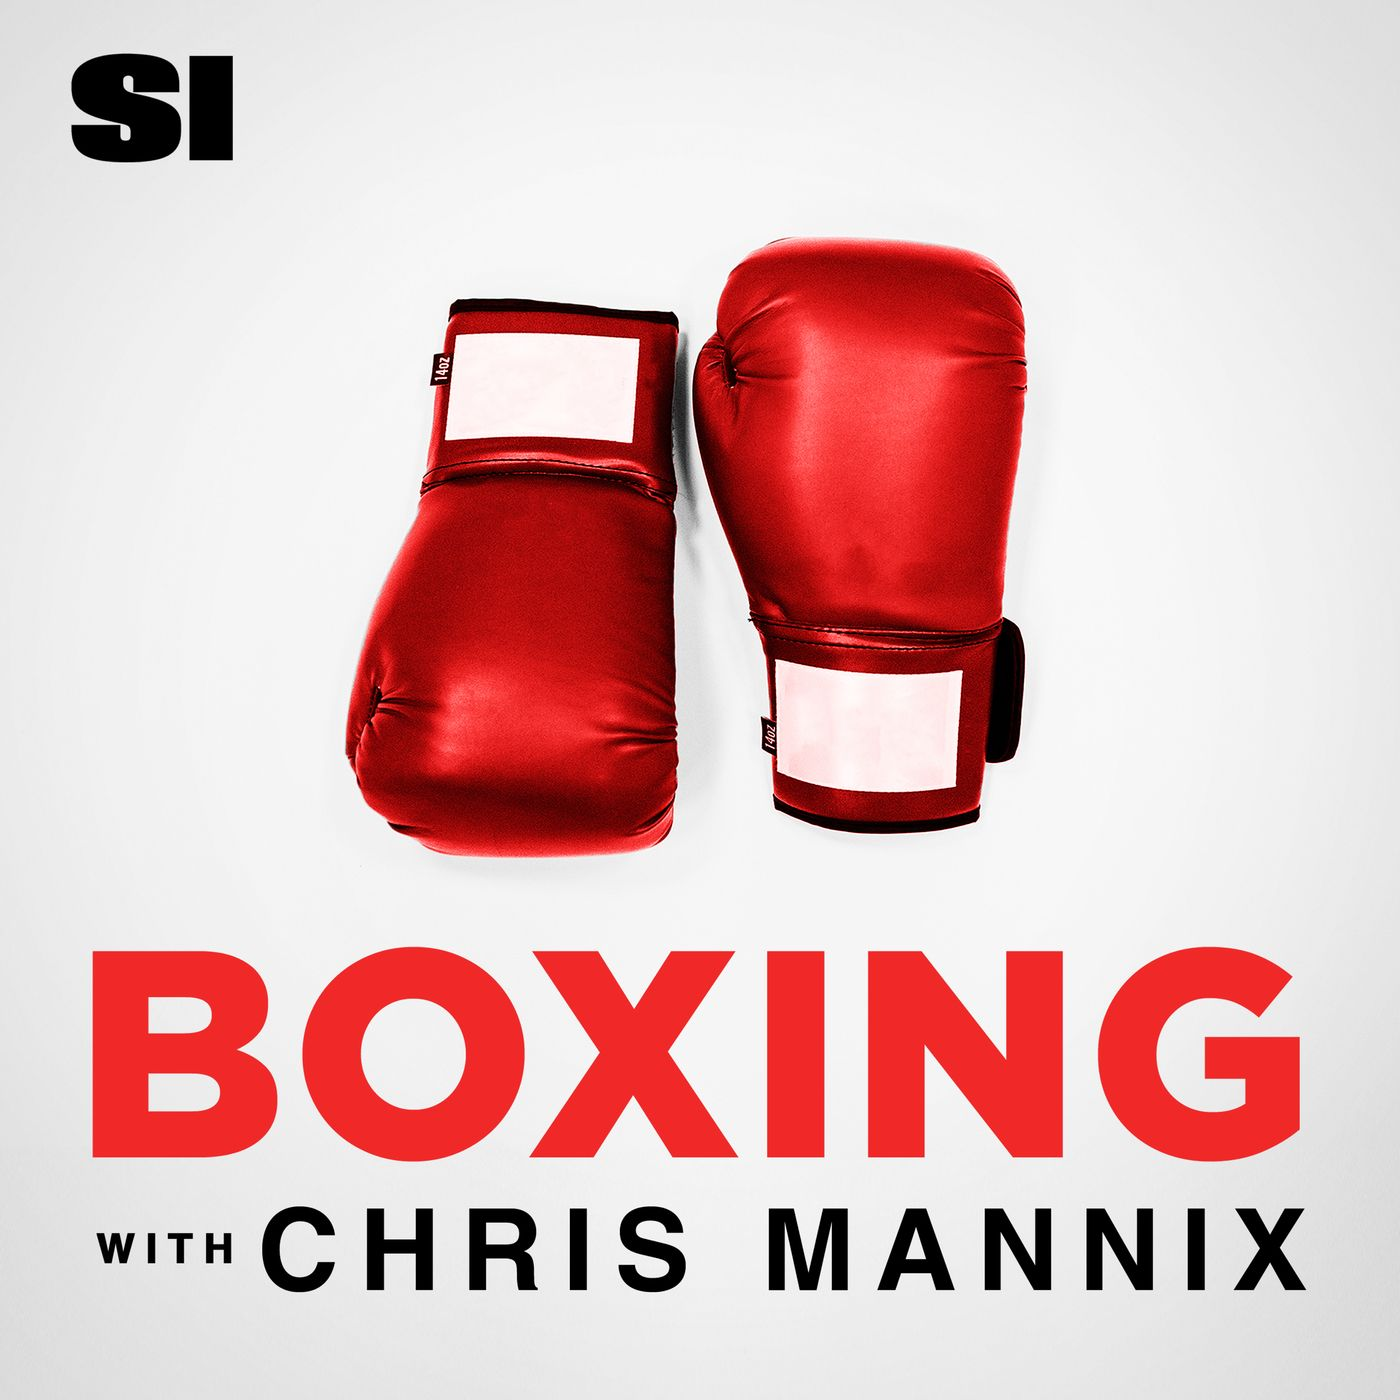 A highlight from Boxing with Chris Mannix - Drama between Tank and Garcia